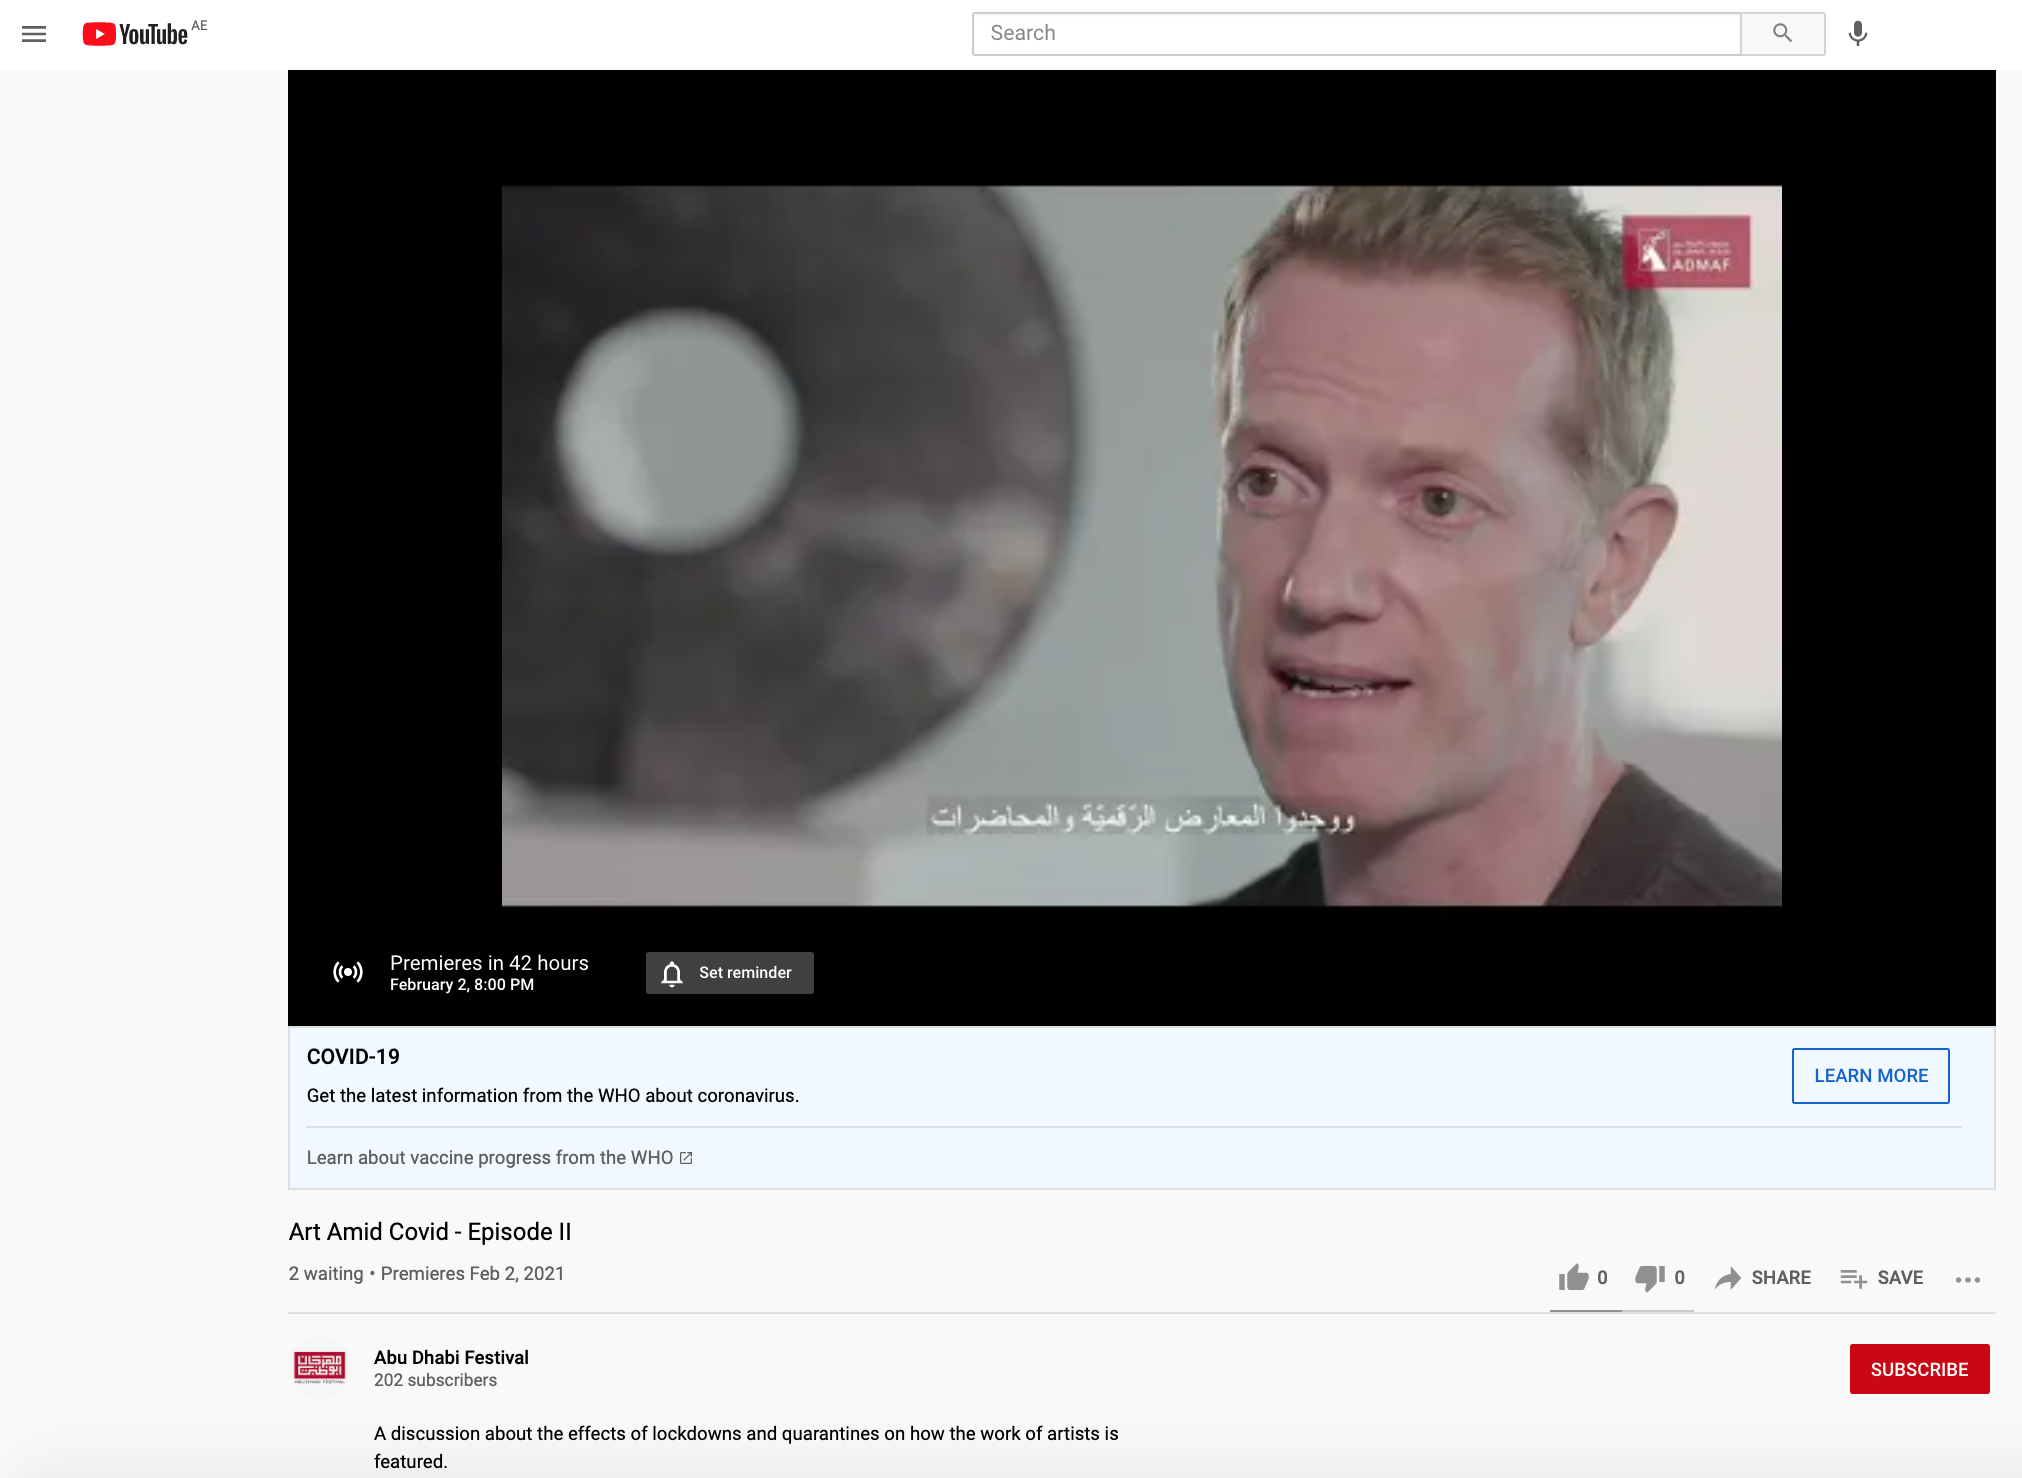  One of the artists featured on the ADMAF website for participating in the 2021 Abu Dhabi Festival as part of the ‘Art Amid Covid’ video short series rereleased in Jan 2021  https://www.youtube.com/watch?v=grjea7oE4Xs 